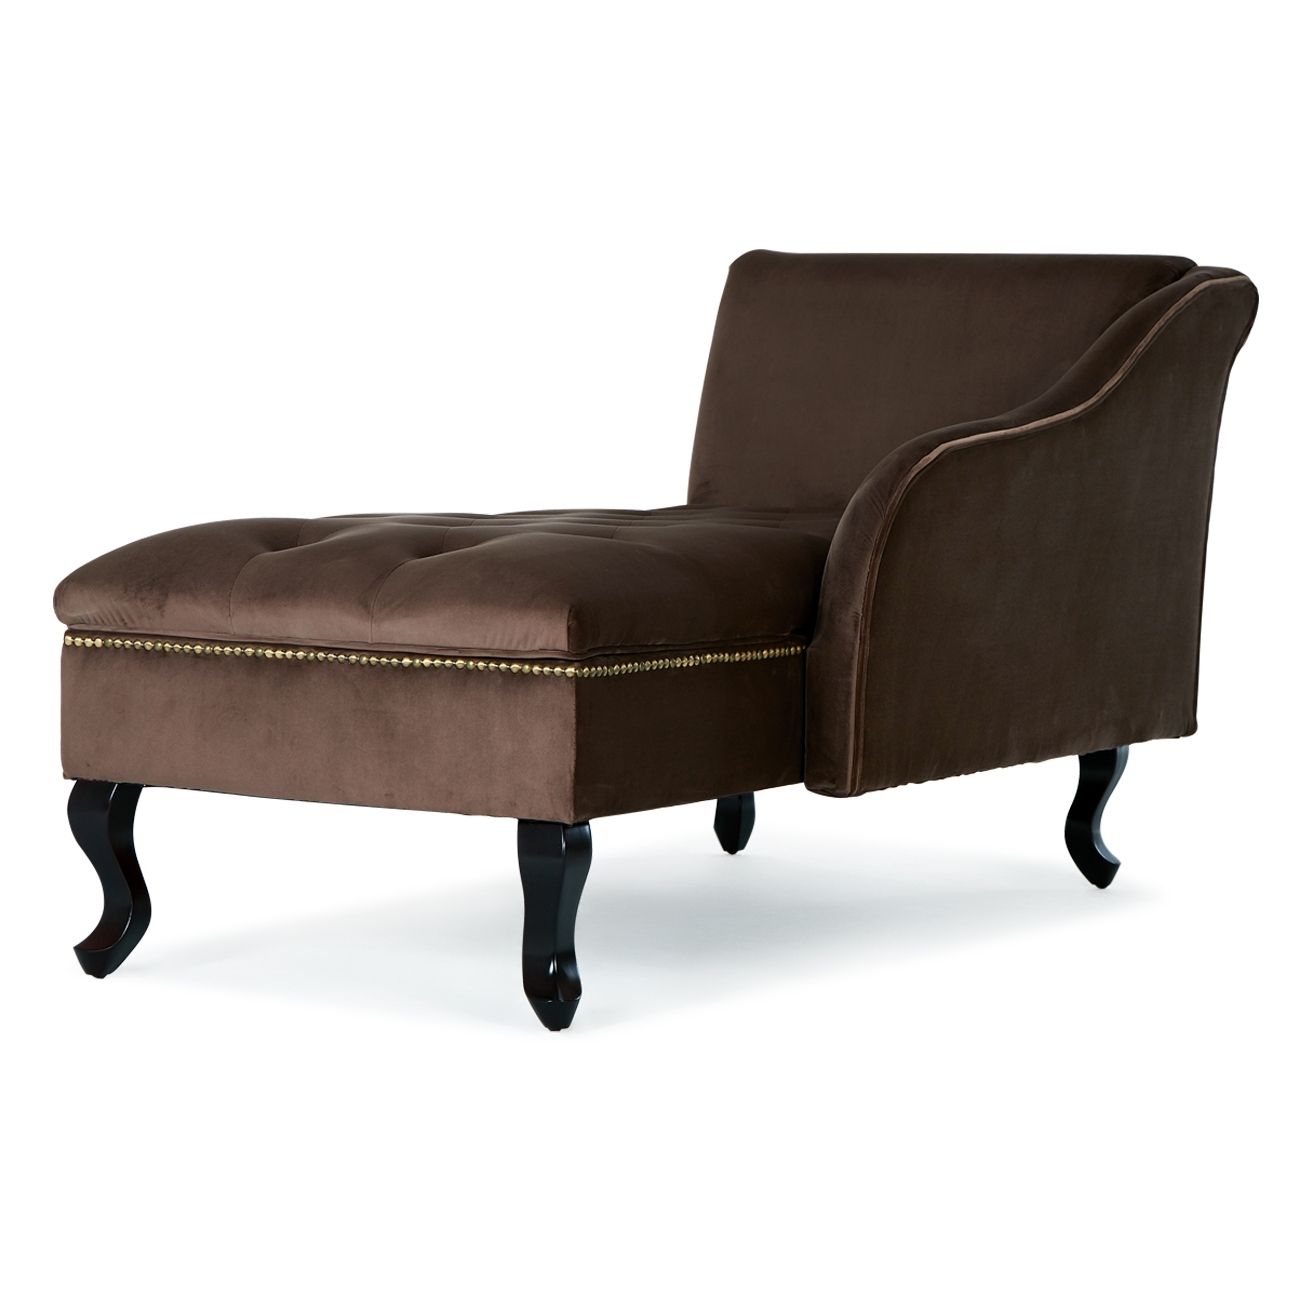 Tufted Chaise Lounge Velveteen Chair Couch Gold Nailhead Trim W In Most Recently Released Chaises With Storage (View 14 of 15)